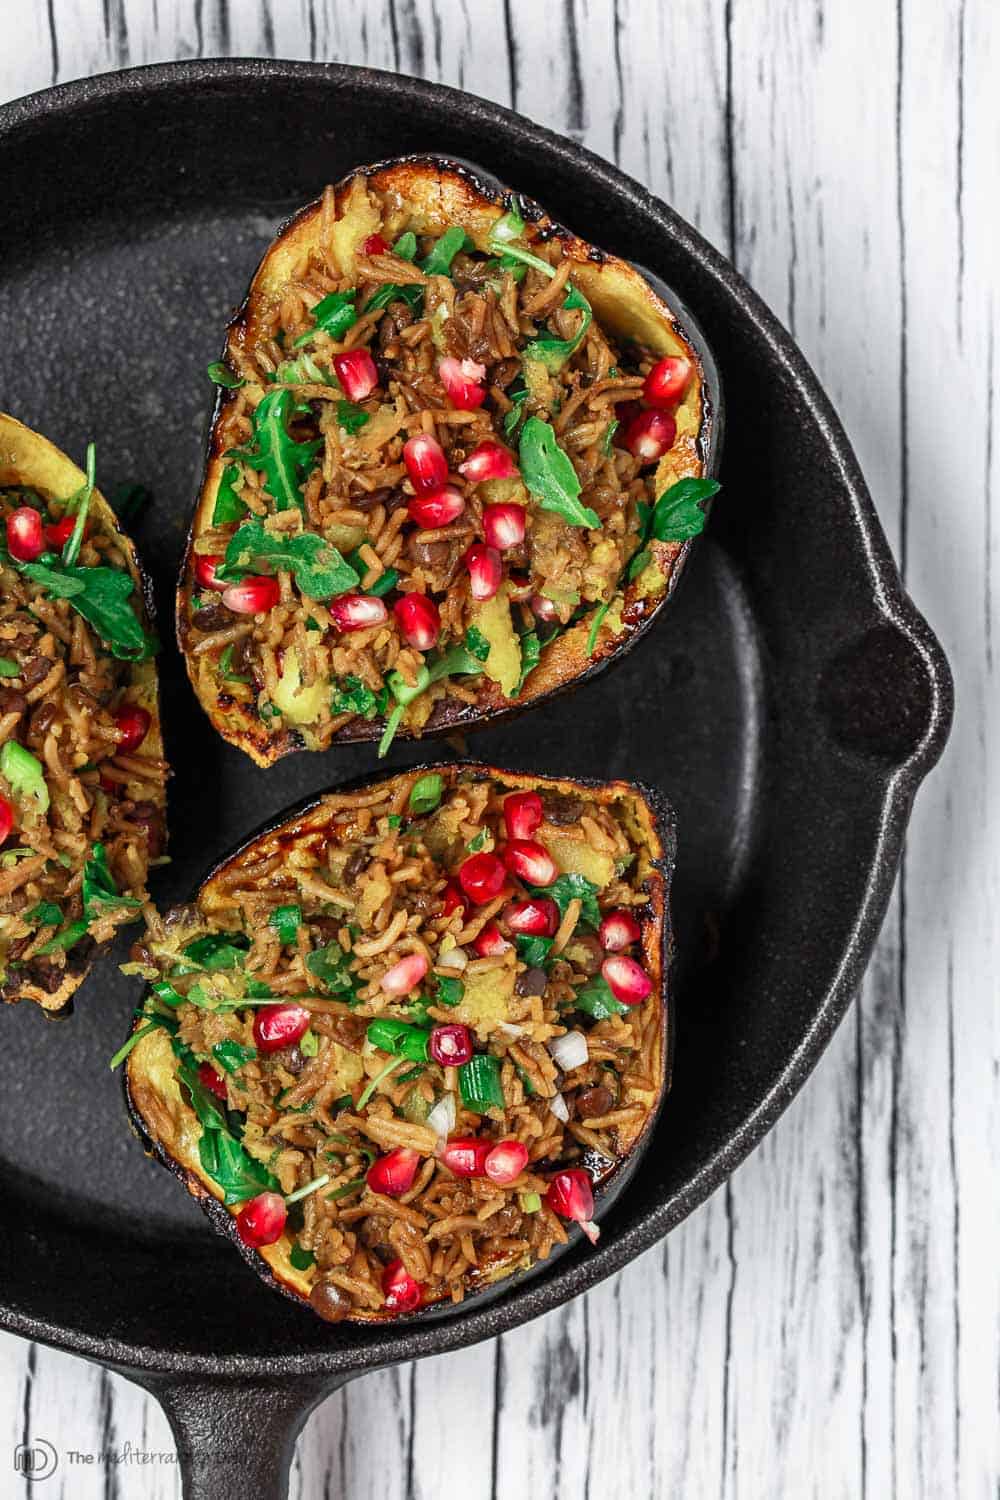 Mediterranean Style Stuffed Acorn Squash Recipe | The Mediterranean Dish.Simple all-start stuffed acorn squash recipe! Prepared Mediterranean-style with an easy rice and lentil pilaf mixture with fresh herbs and pomegranate seeds. A major shortcut makes all the difference! See the recipe on TheMediterraneanDish.com #acornsquash #mediterraneanrecipe #roastedsquash #squashrecipe #thanksigivngdinner 